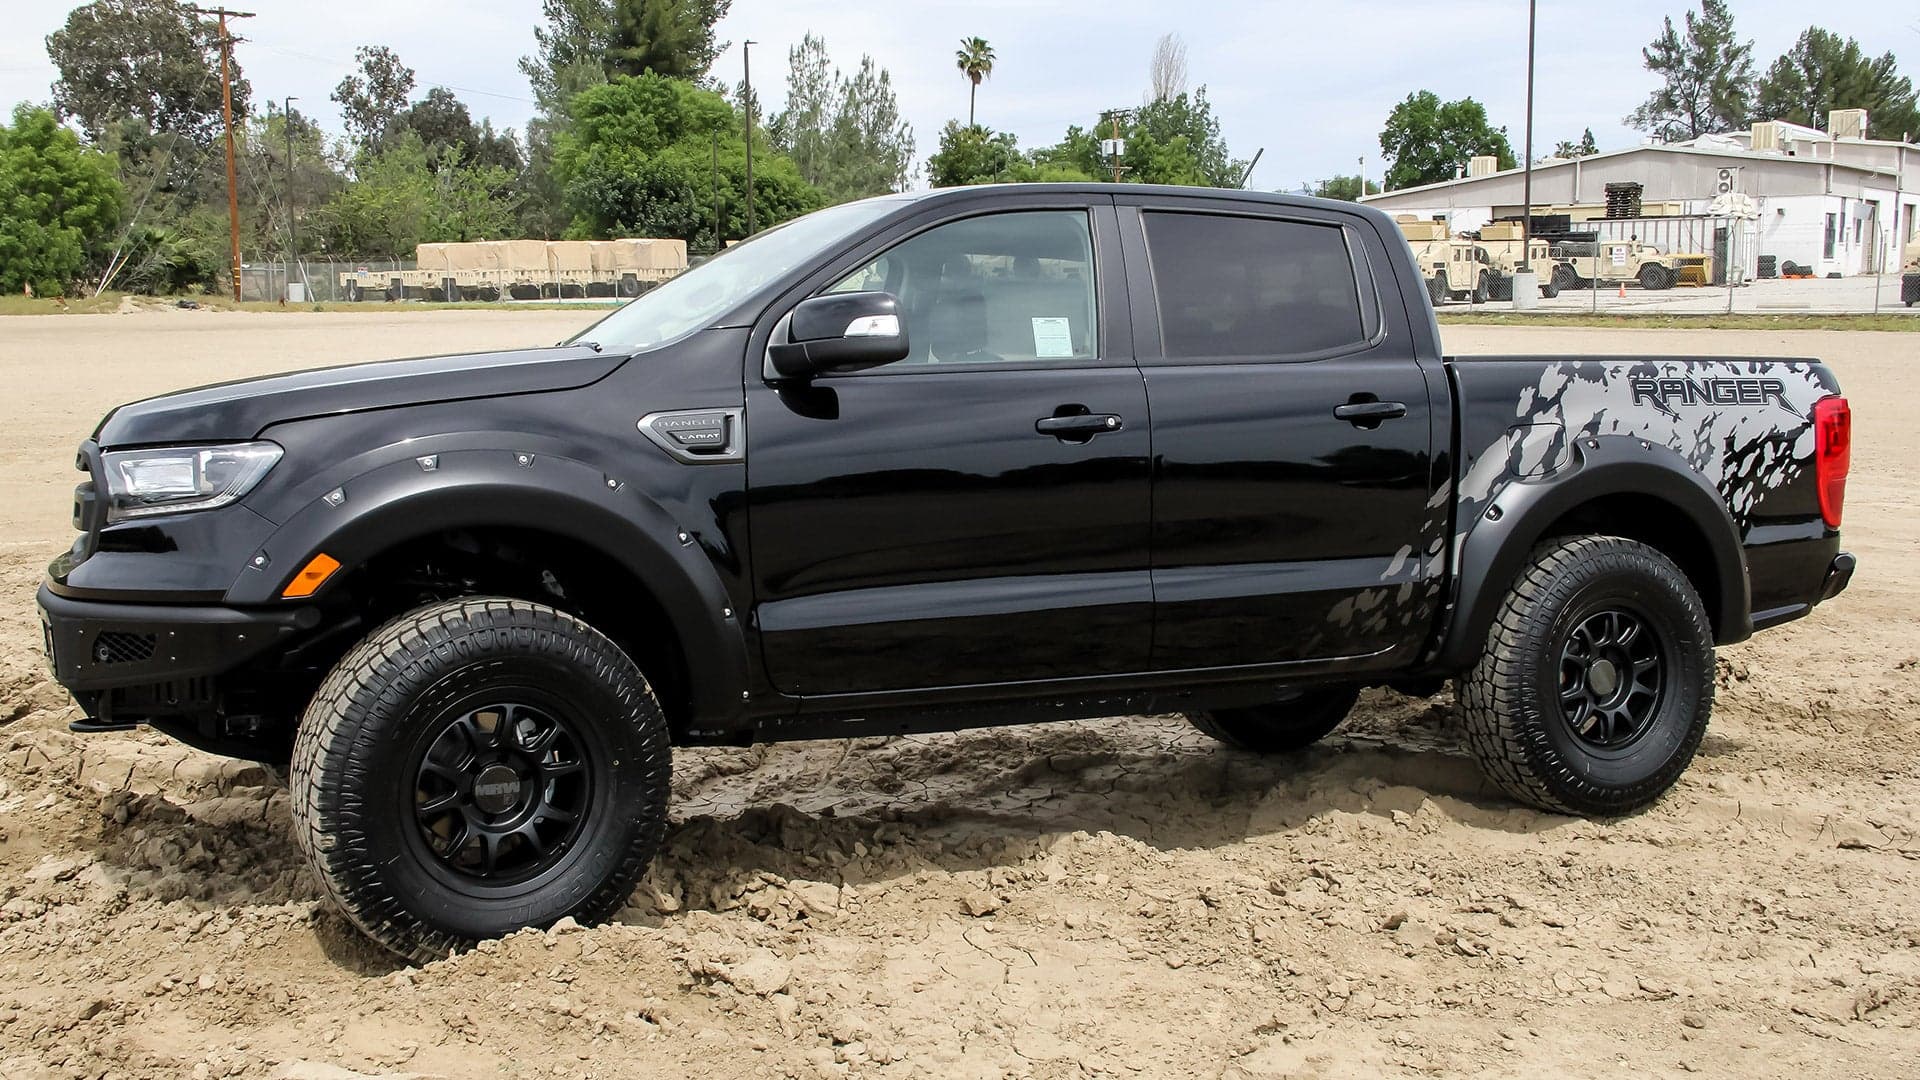 Galpin Is Selling These 2019 Ford Ranger Raptor Pickup Truck Kits for $13,950